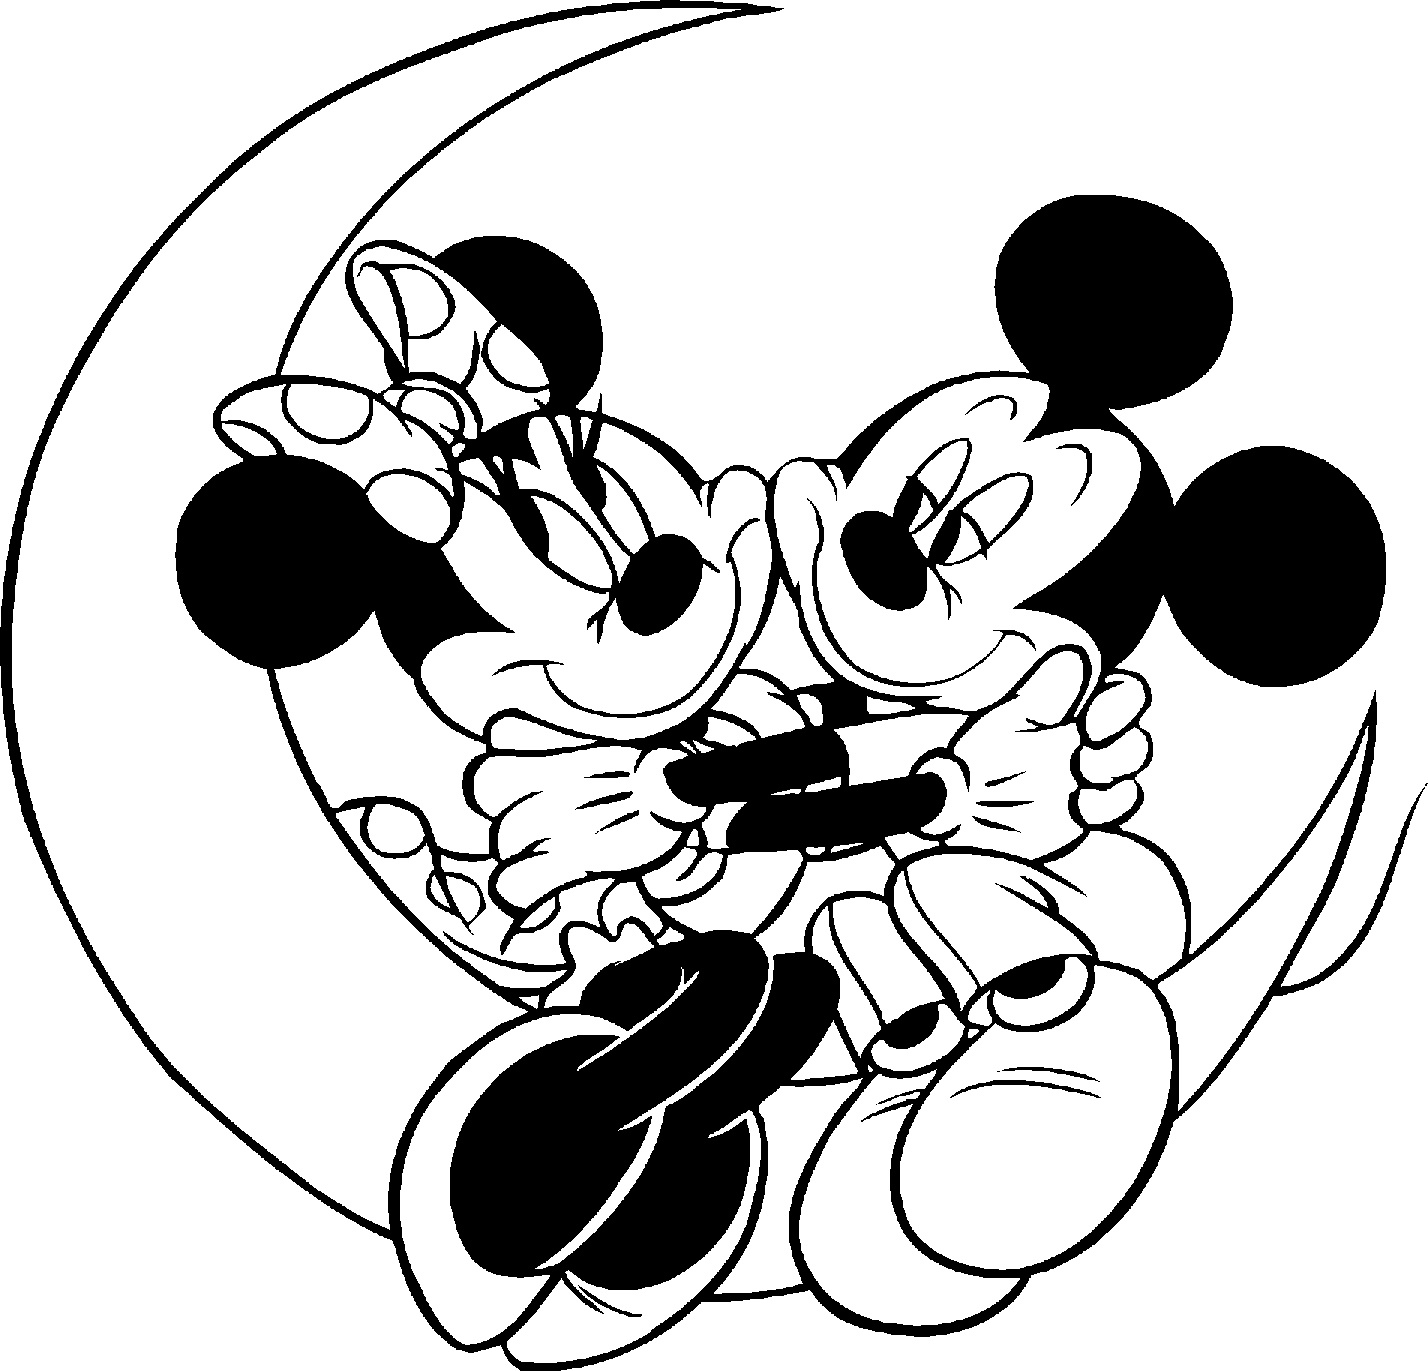 Free Printable Mickey Mouse Coloring Pages For Kids - Free Printable Minnie Mouse Coloring Pages